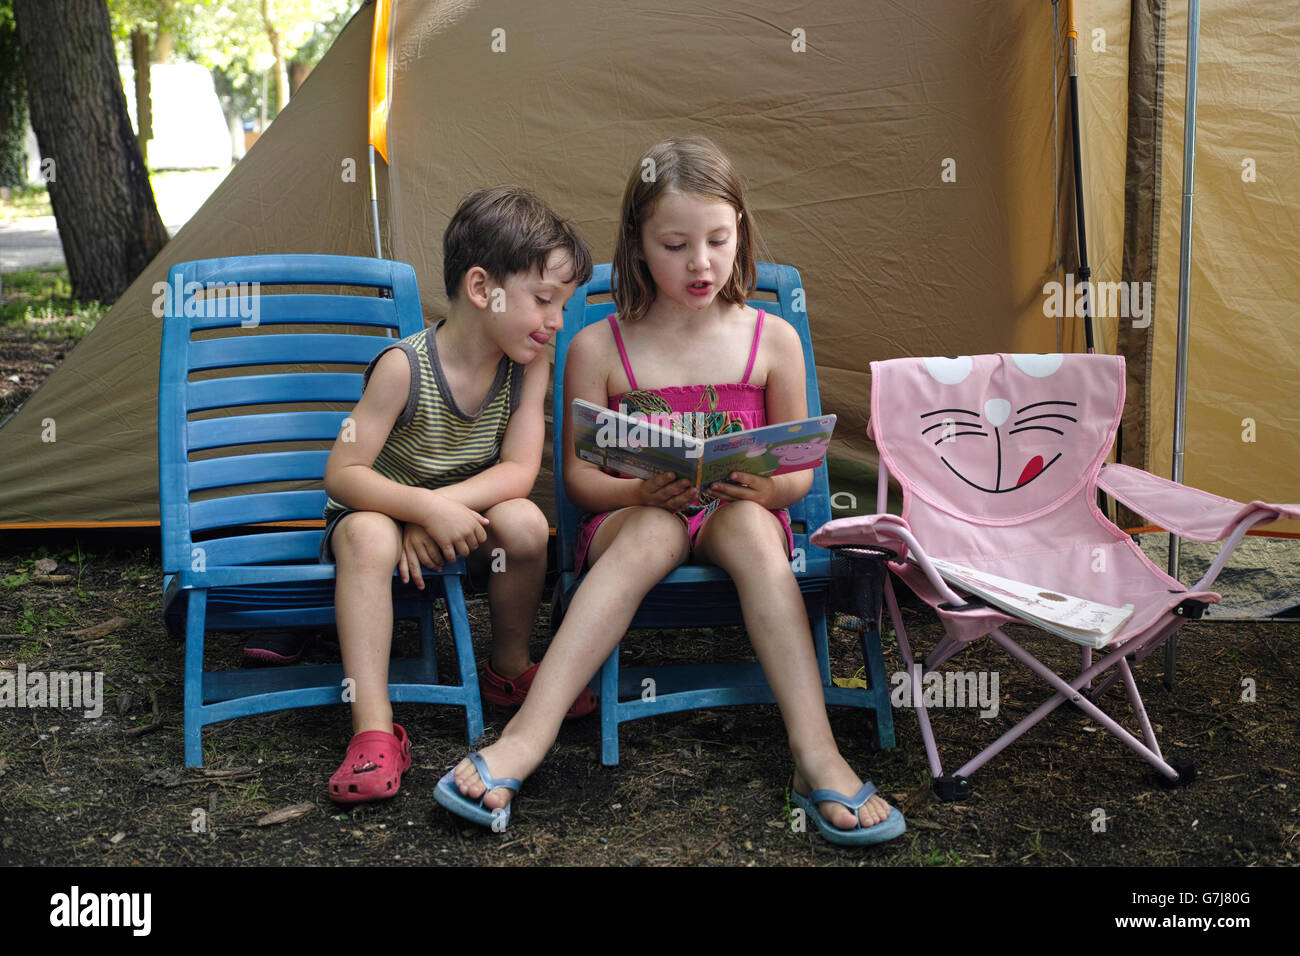 Lago di Bracciano. Lazio. Italy. Six year old girl reading to a younger 4 year old boy on camping holiday. Stock Photo